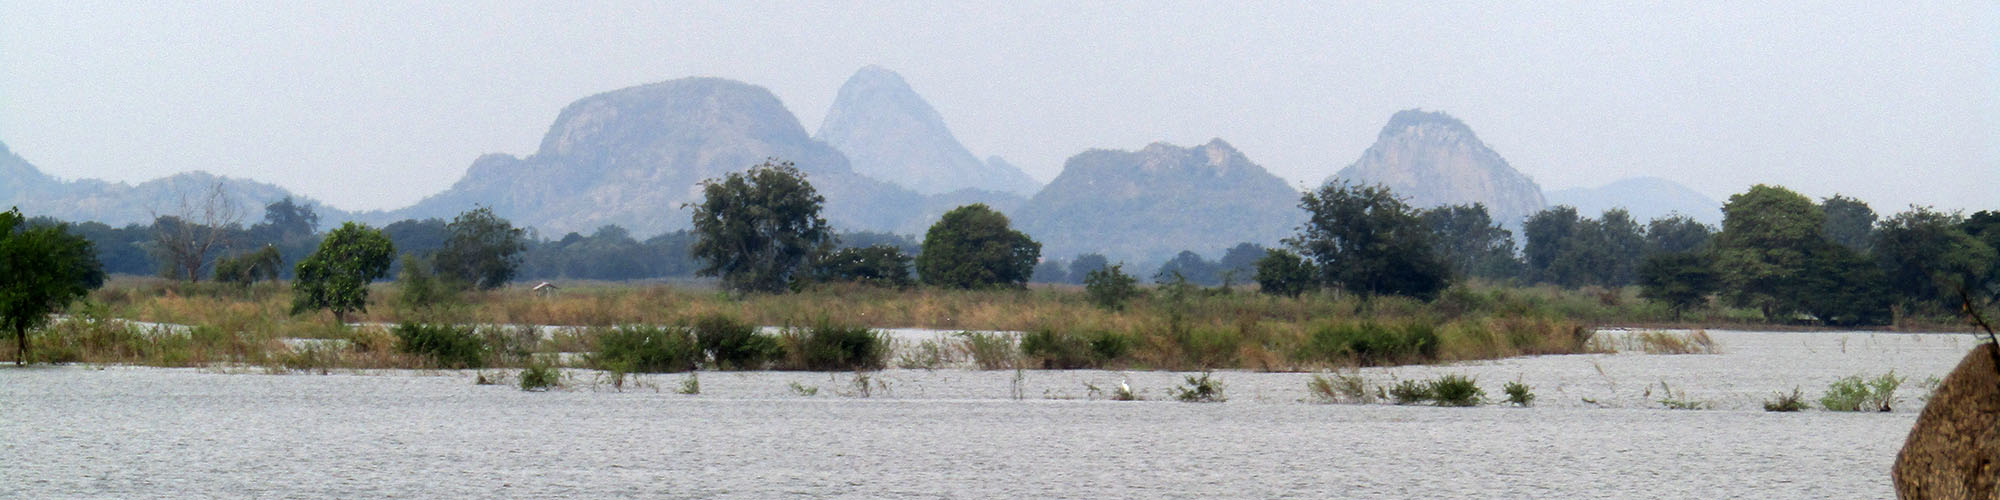 Pasak Chonlasit Reservoir looking south from Highway 2256, Lopburi Province